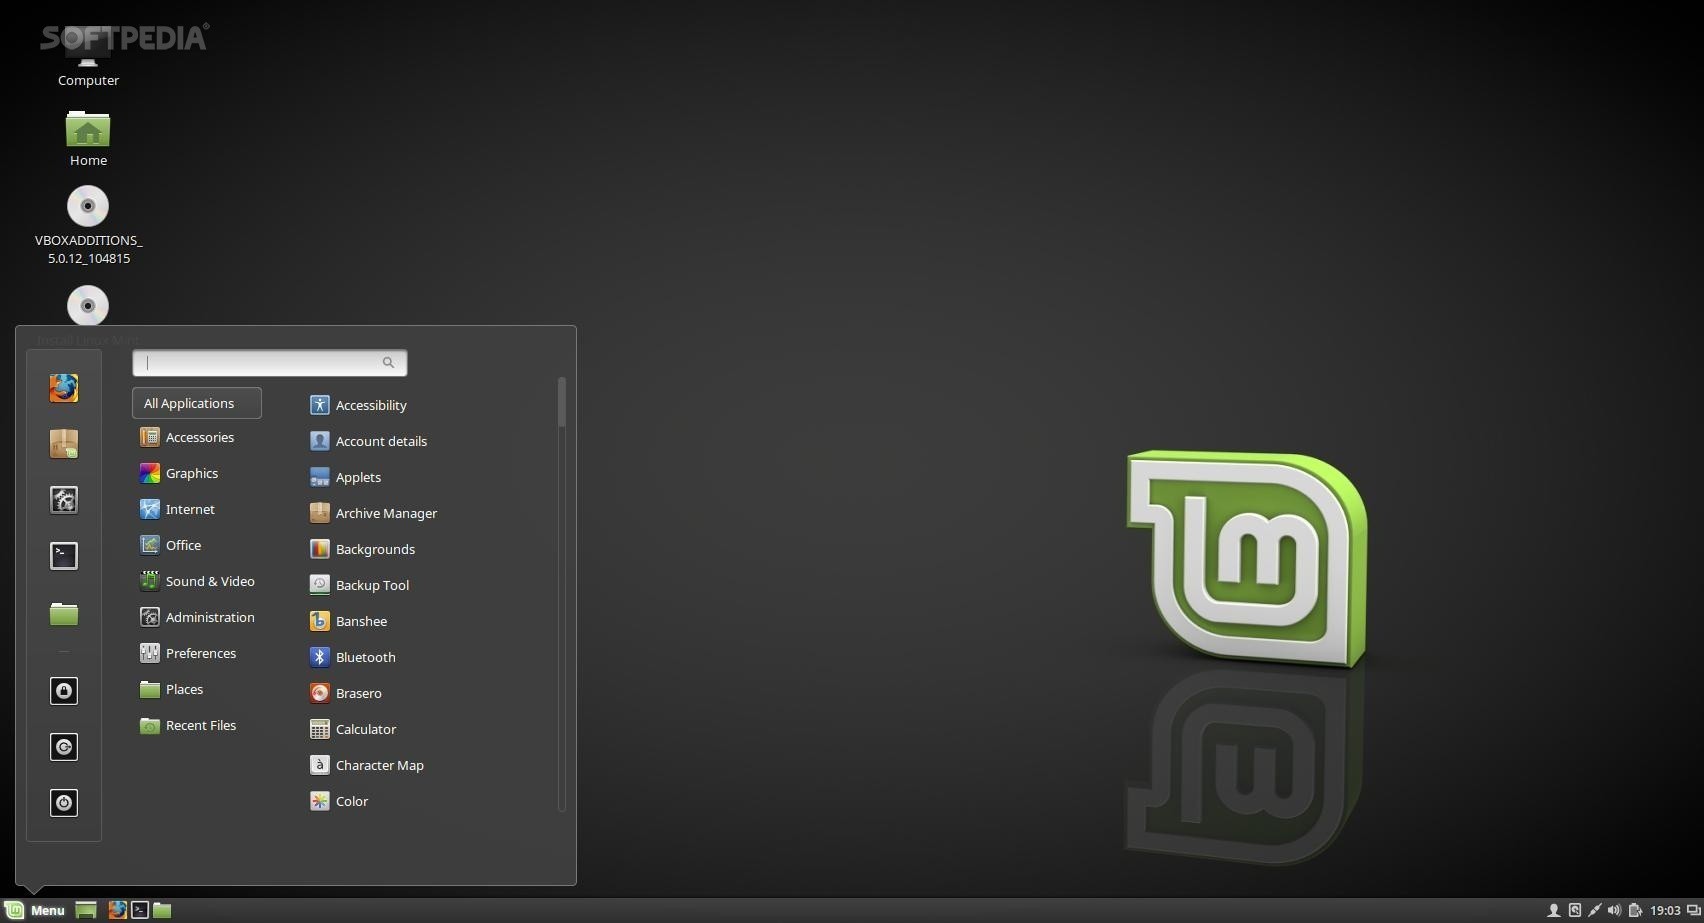 linux-mint-18-kde-xfce-editions-to-land-in-july-along-with-17-3-upgrade-path-505841-2.jpg